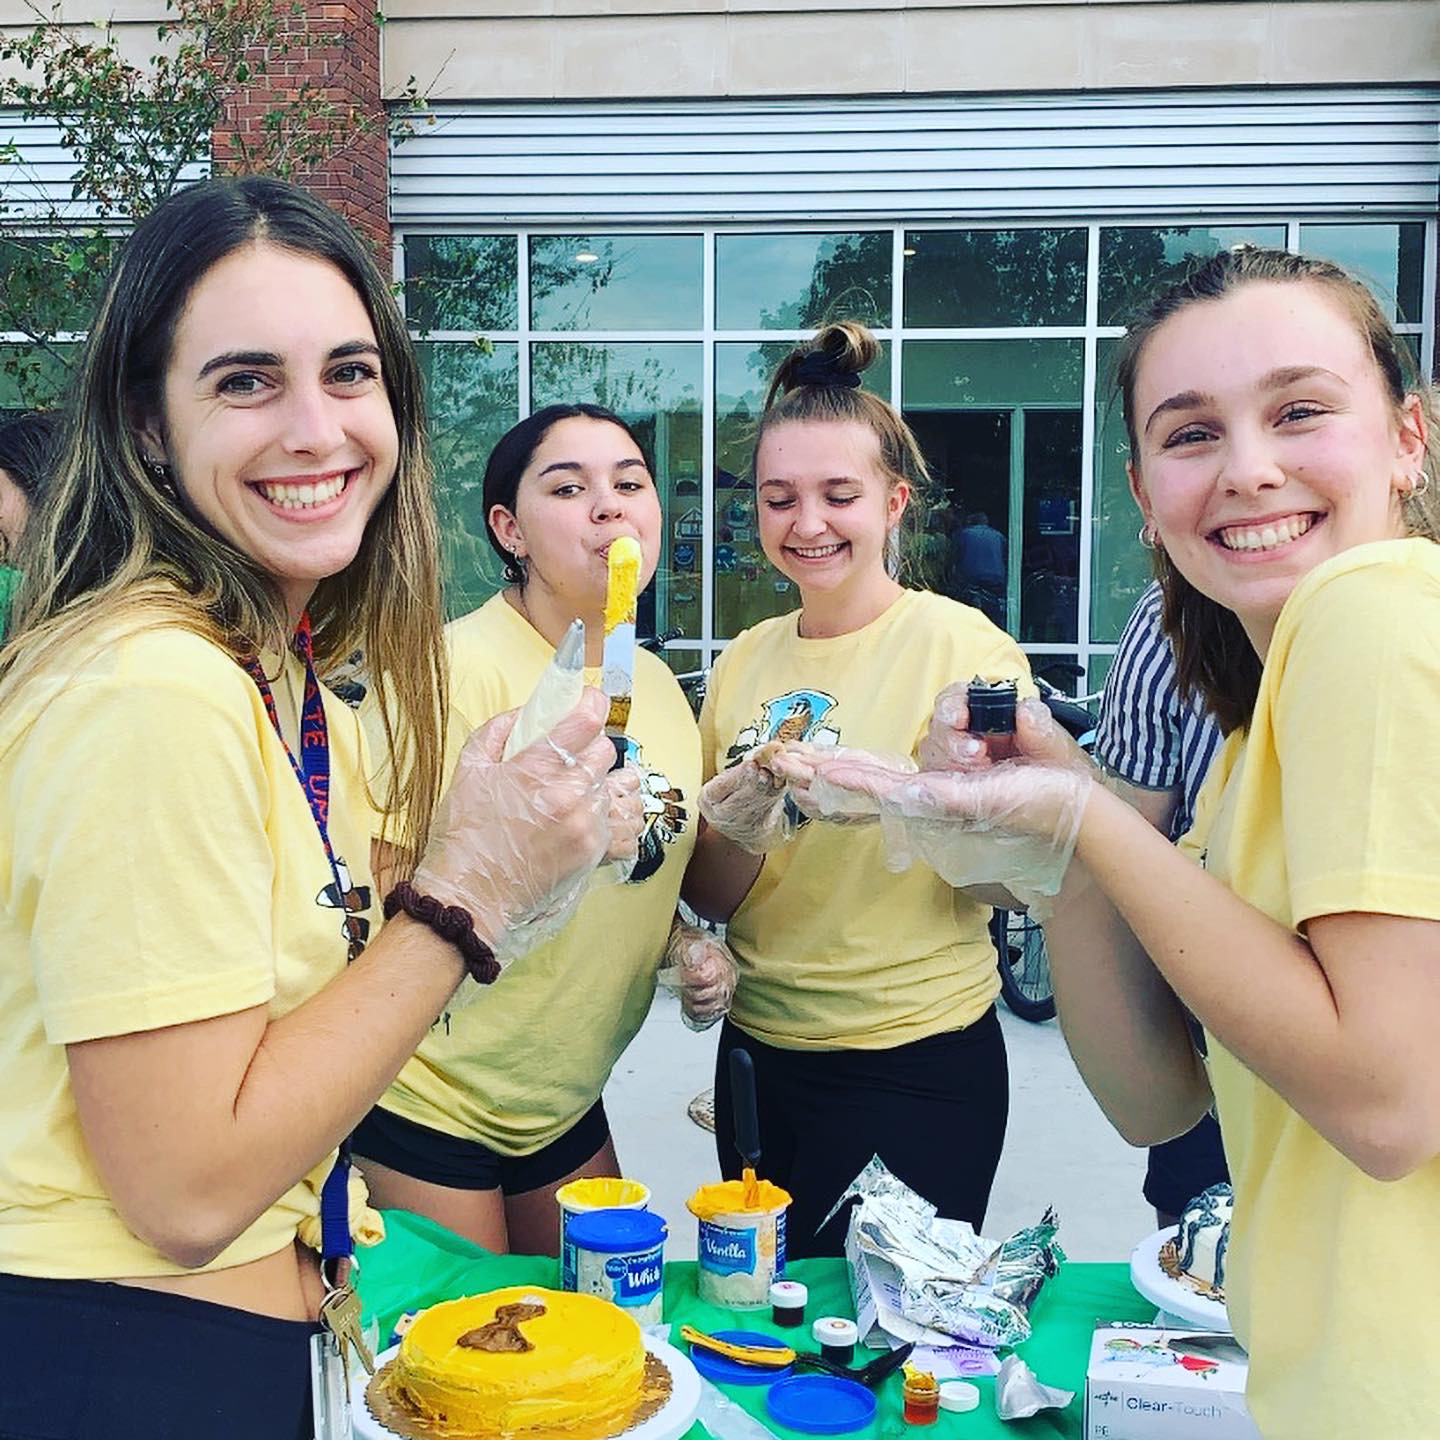 Kestrel House participates in house-wide Cake Decorating competition